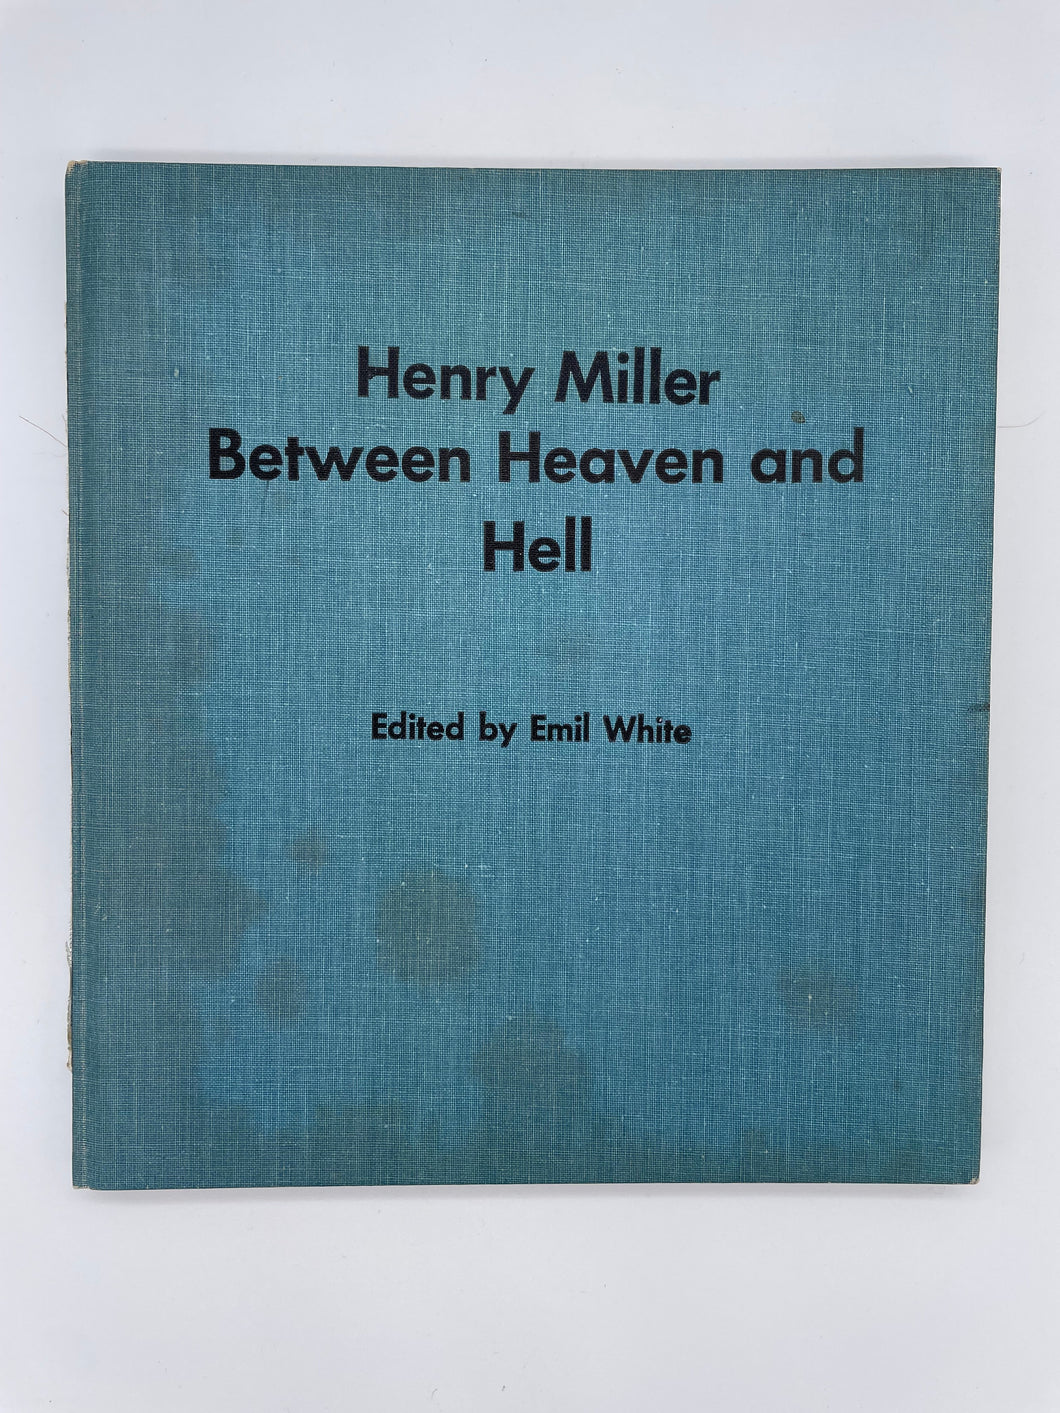 Henry Miller - Between Heaven and Hell: A Symposium